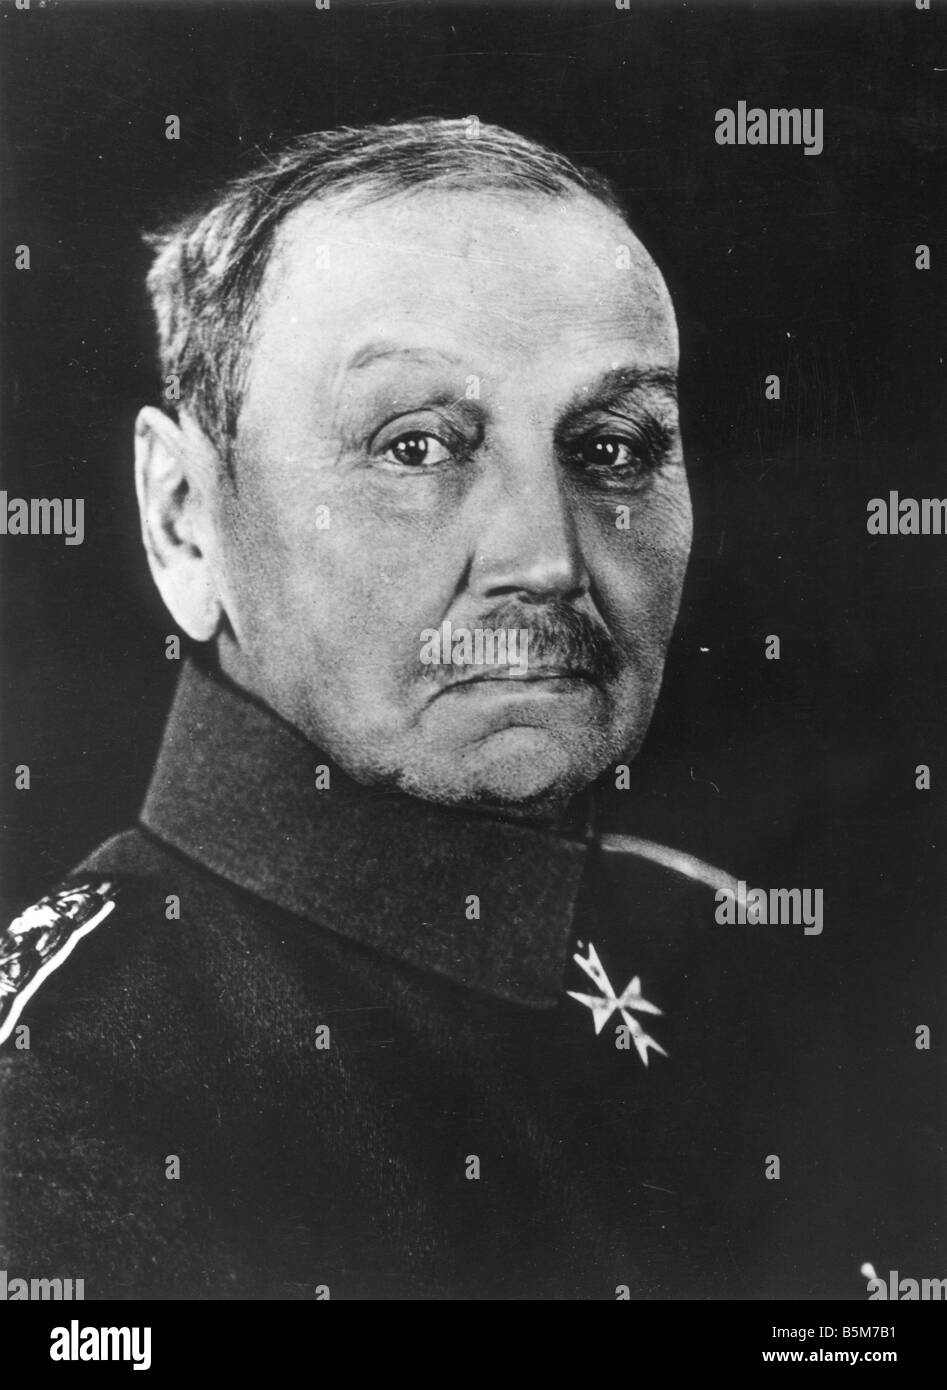 1 K51 B1915 E Alexander von Kluck Photo 1915 Kluck Alexander von Prussian Colonel General 1913 General Inspector of the 8th Army Stock Photo